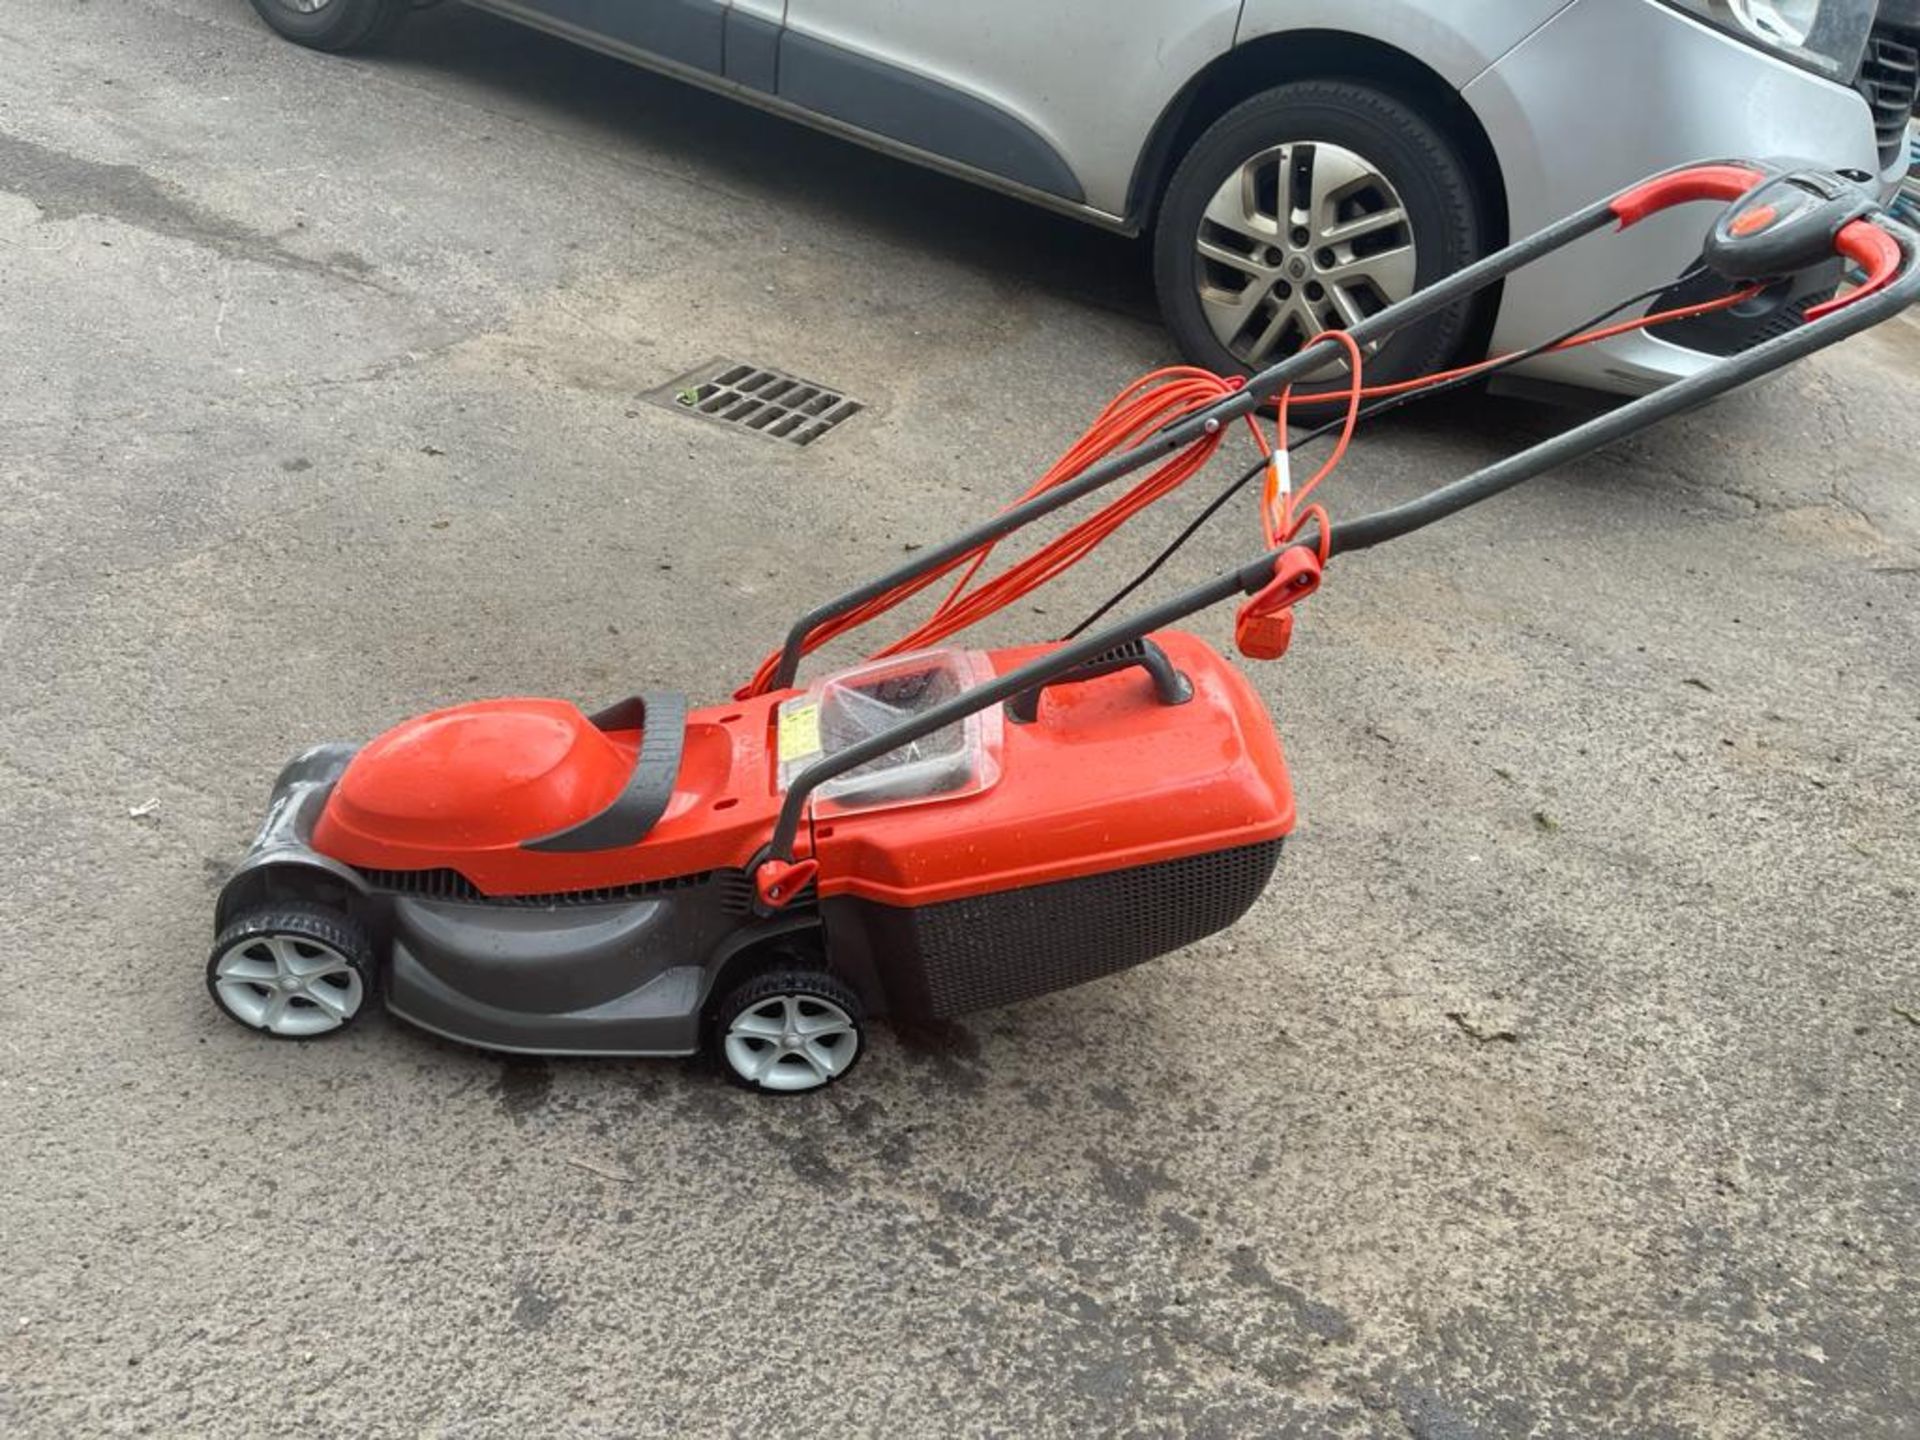 FLYMO 240v MAINS LAWN MOWER, BOUGHT 2021 BUT ONLY USED ONCE! *NO VAT* - Image 3 of 5